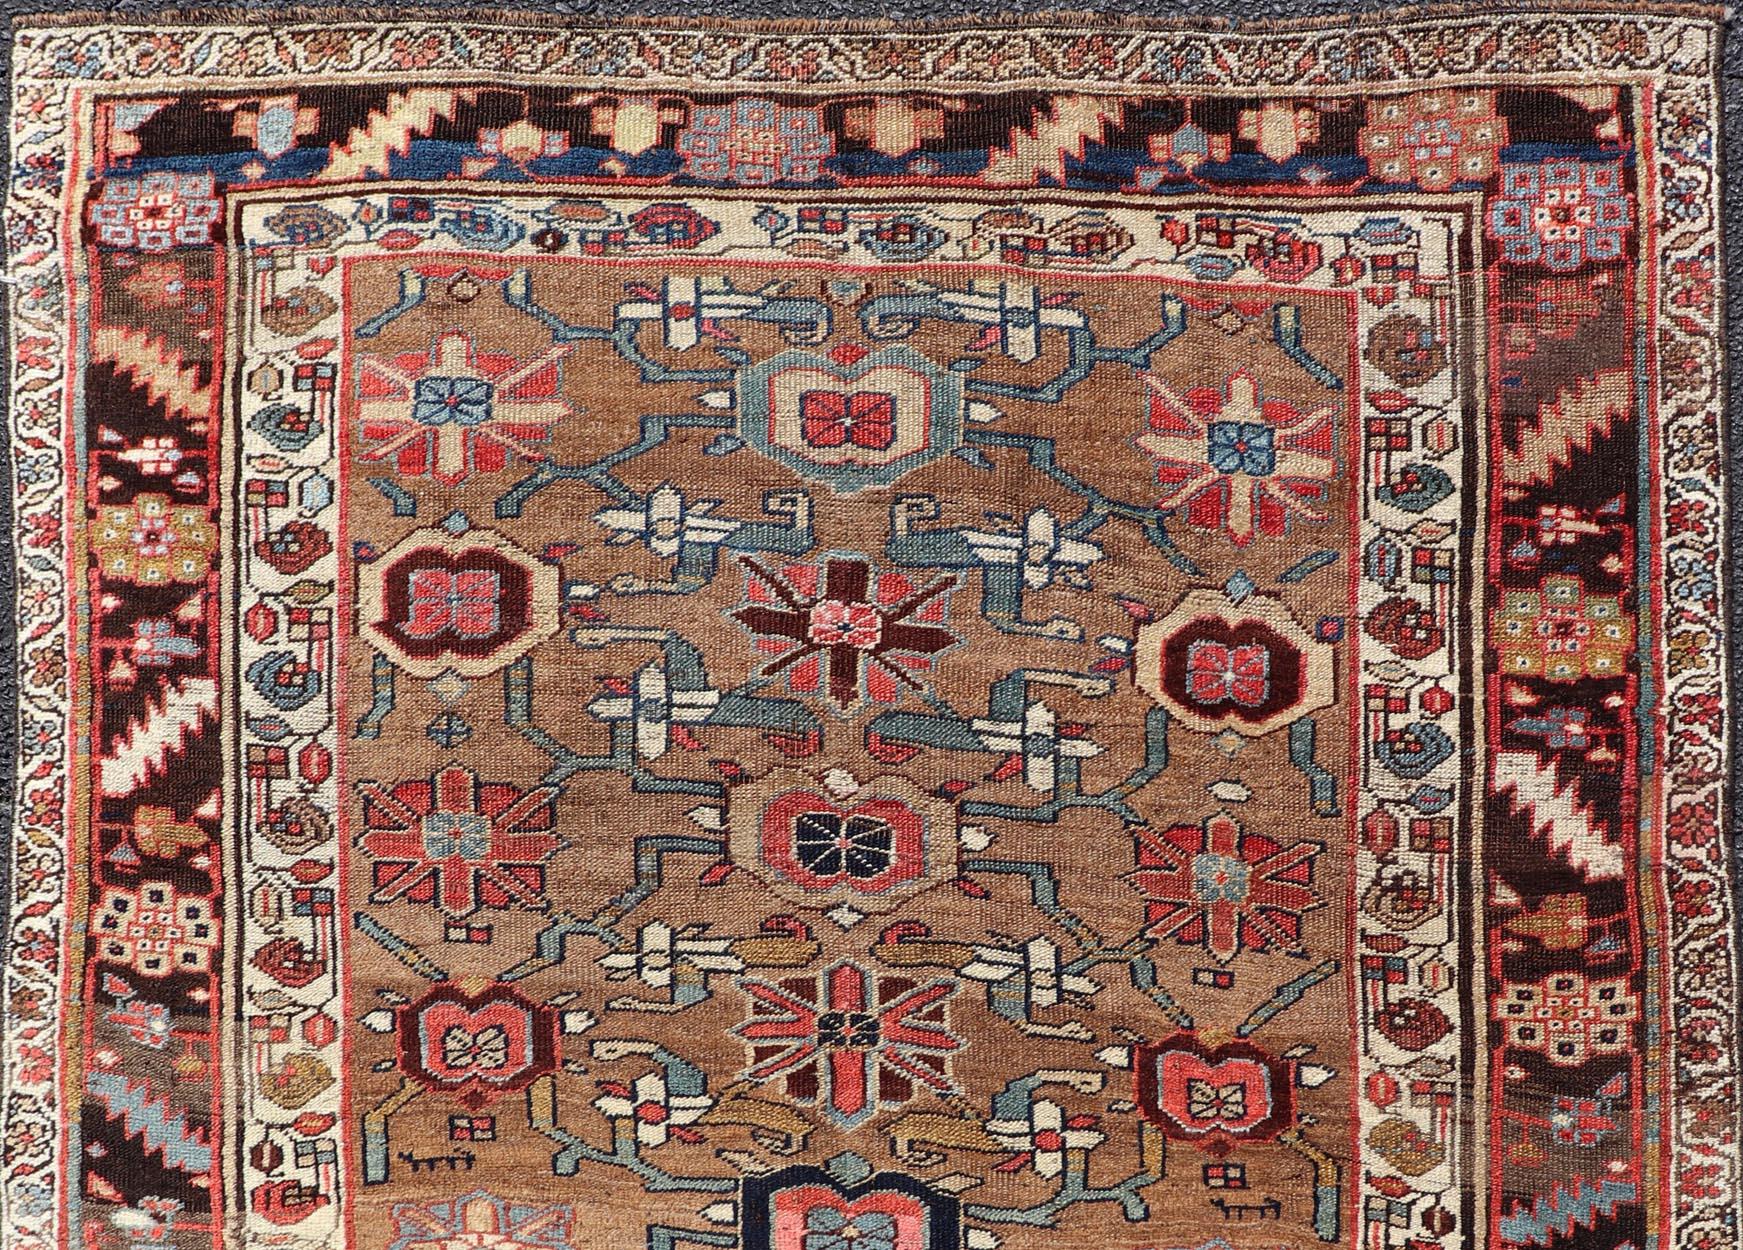 Hand-Knotted Square Antique Persian Bidjar Rug with Floral Motifs in Brown, Tan, & Green For Sale